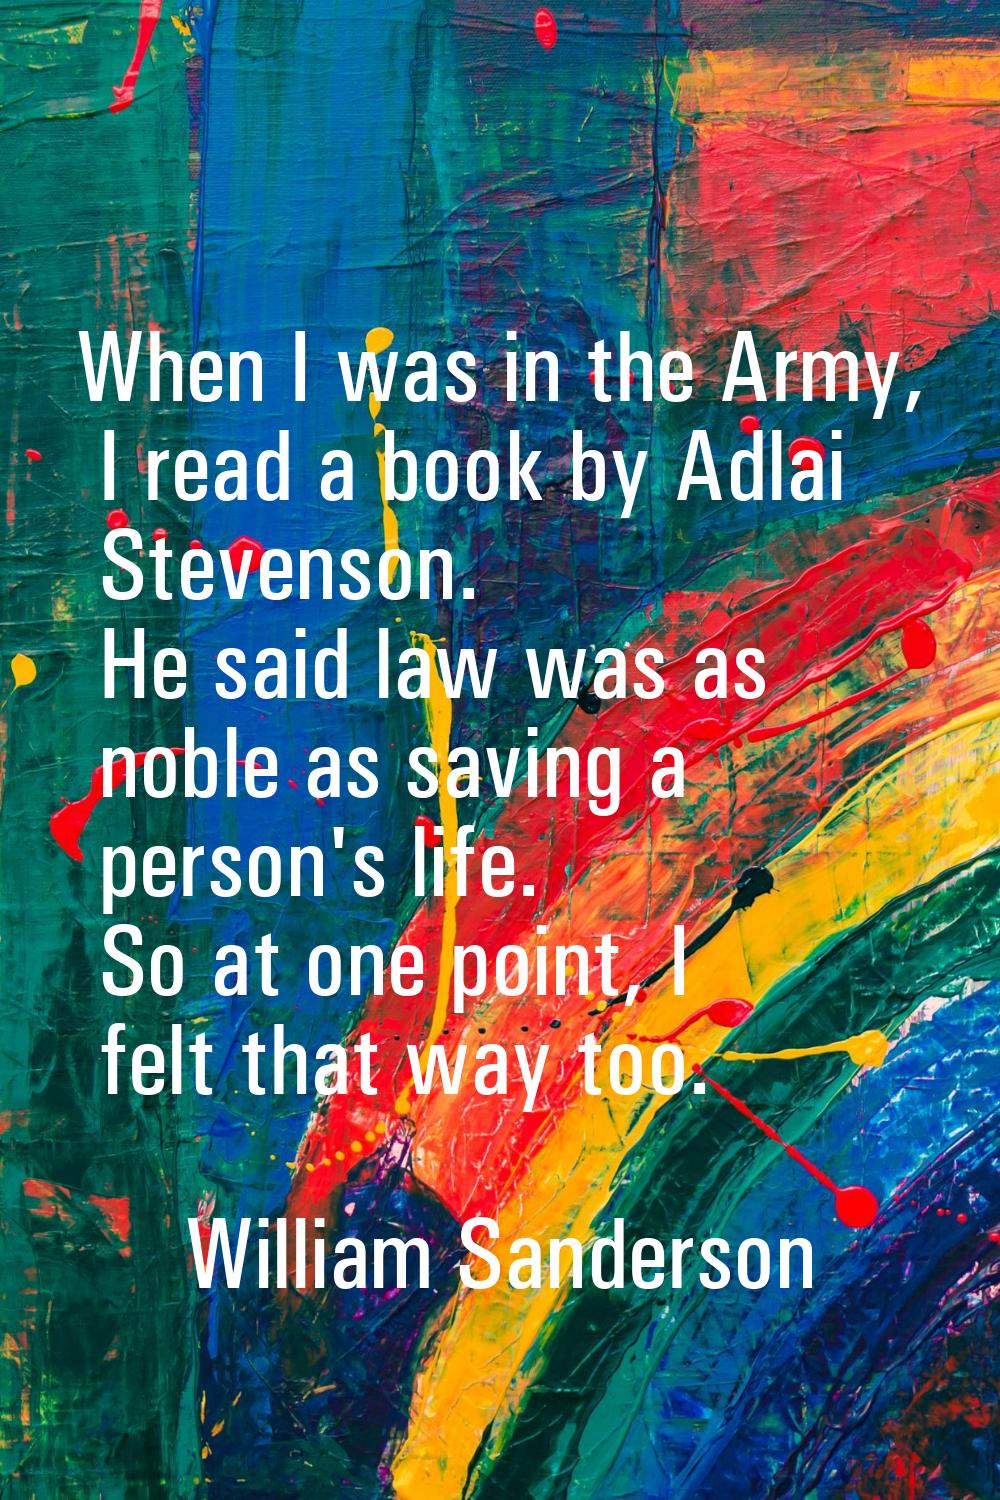 When I was in the Army, I read a book by Adlai Stevenson. He said law was as noble as saving a pers